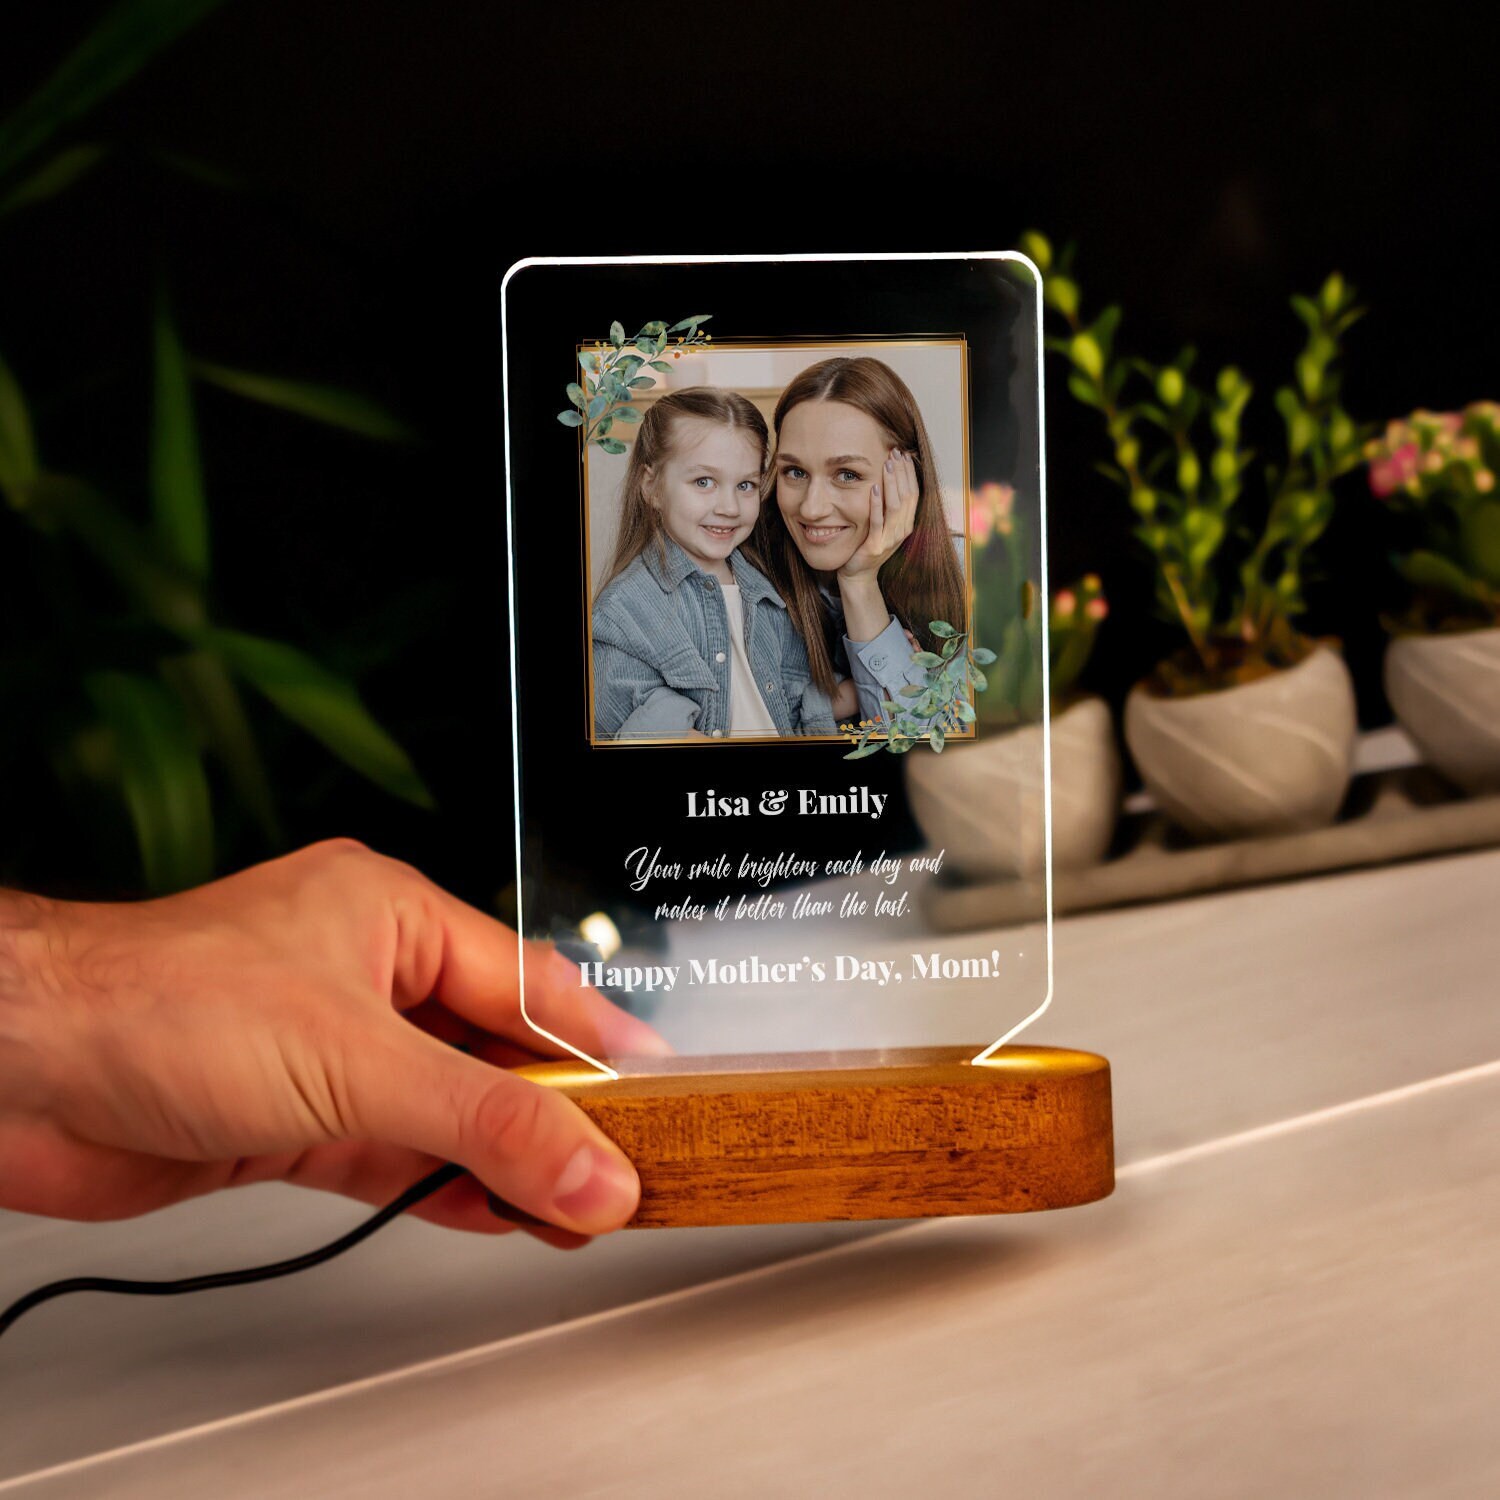 Mom Gifts for Mother's Day Acrylic USB Low Power Engraved Night Light for Mom Birthday Gifts for Mom Son Birthday Mothers Day Gifts for Mom from Daughter Thanksgiving 